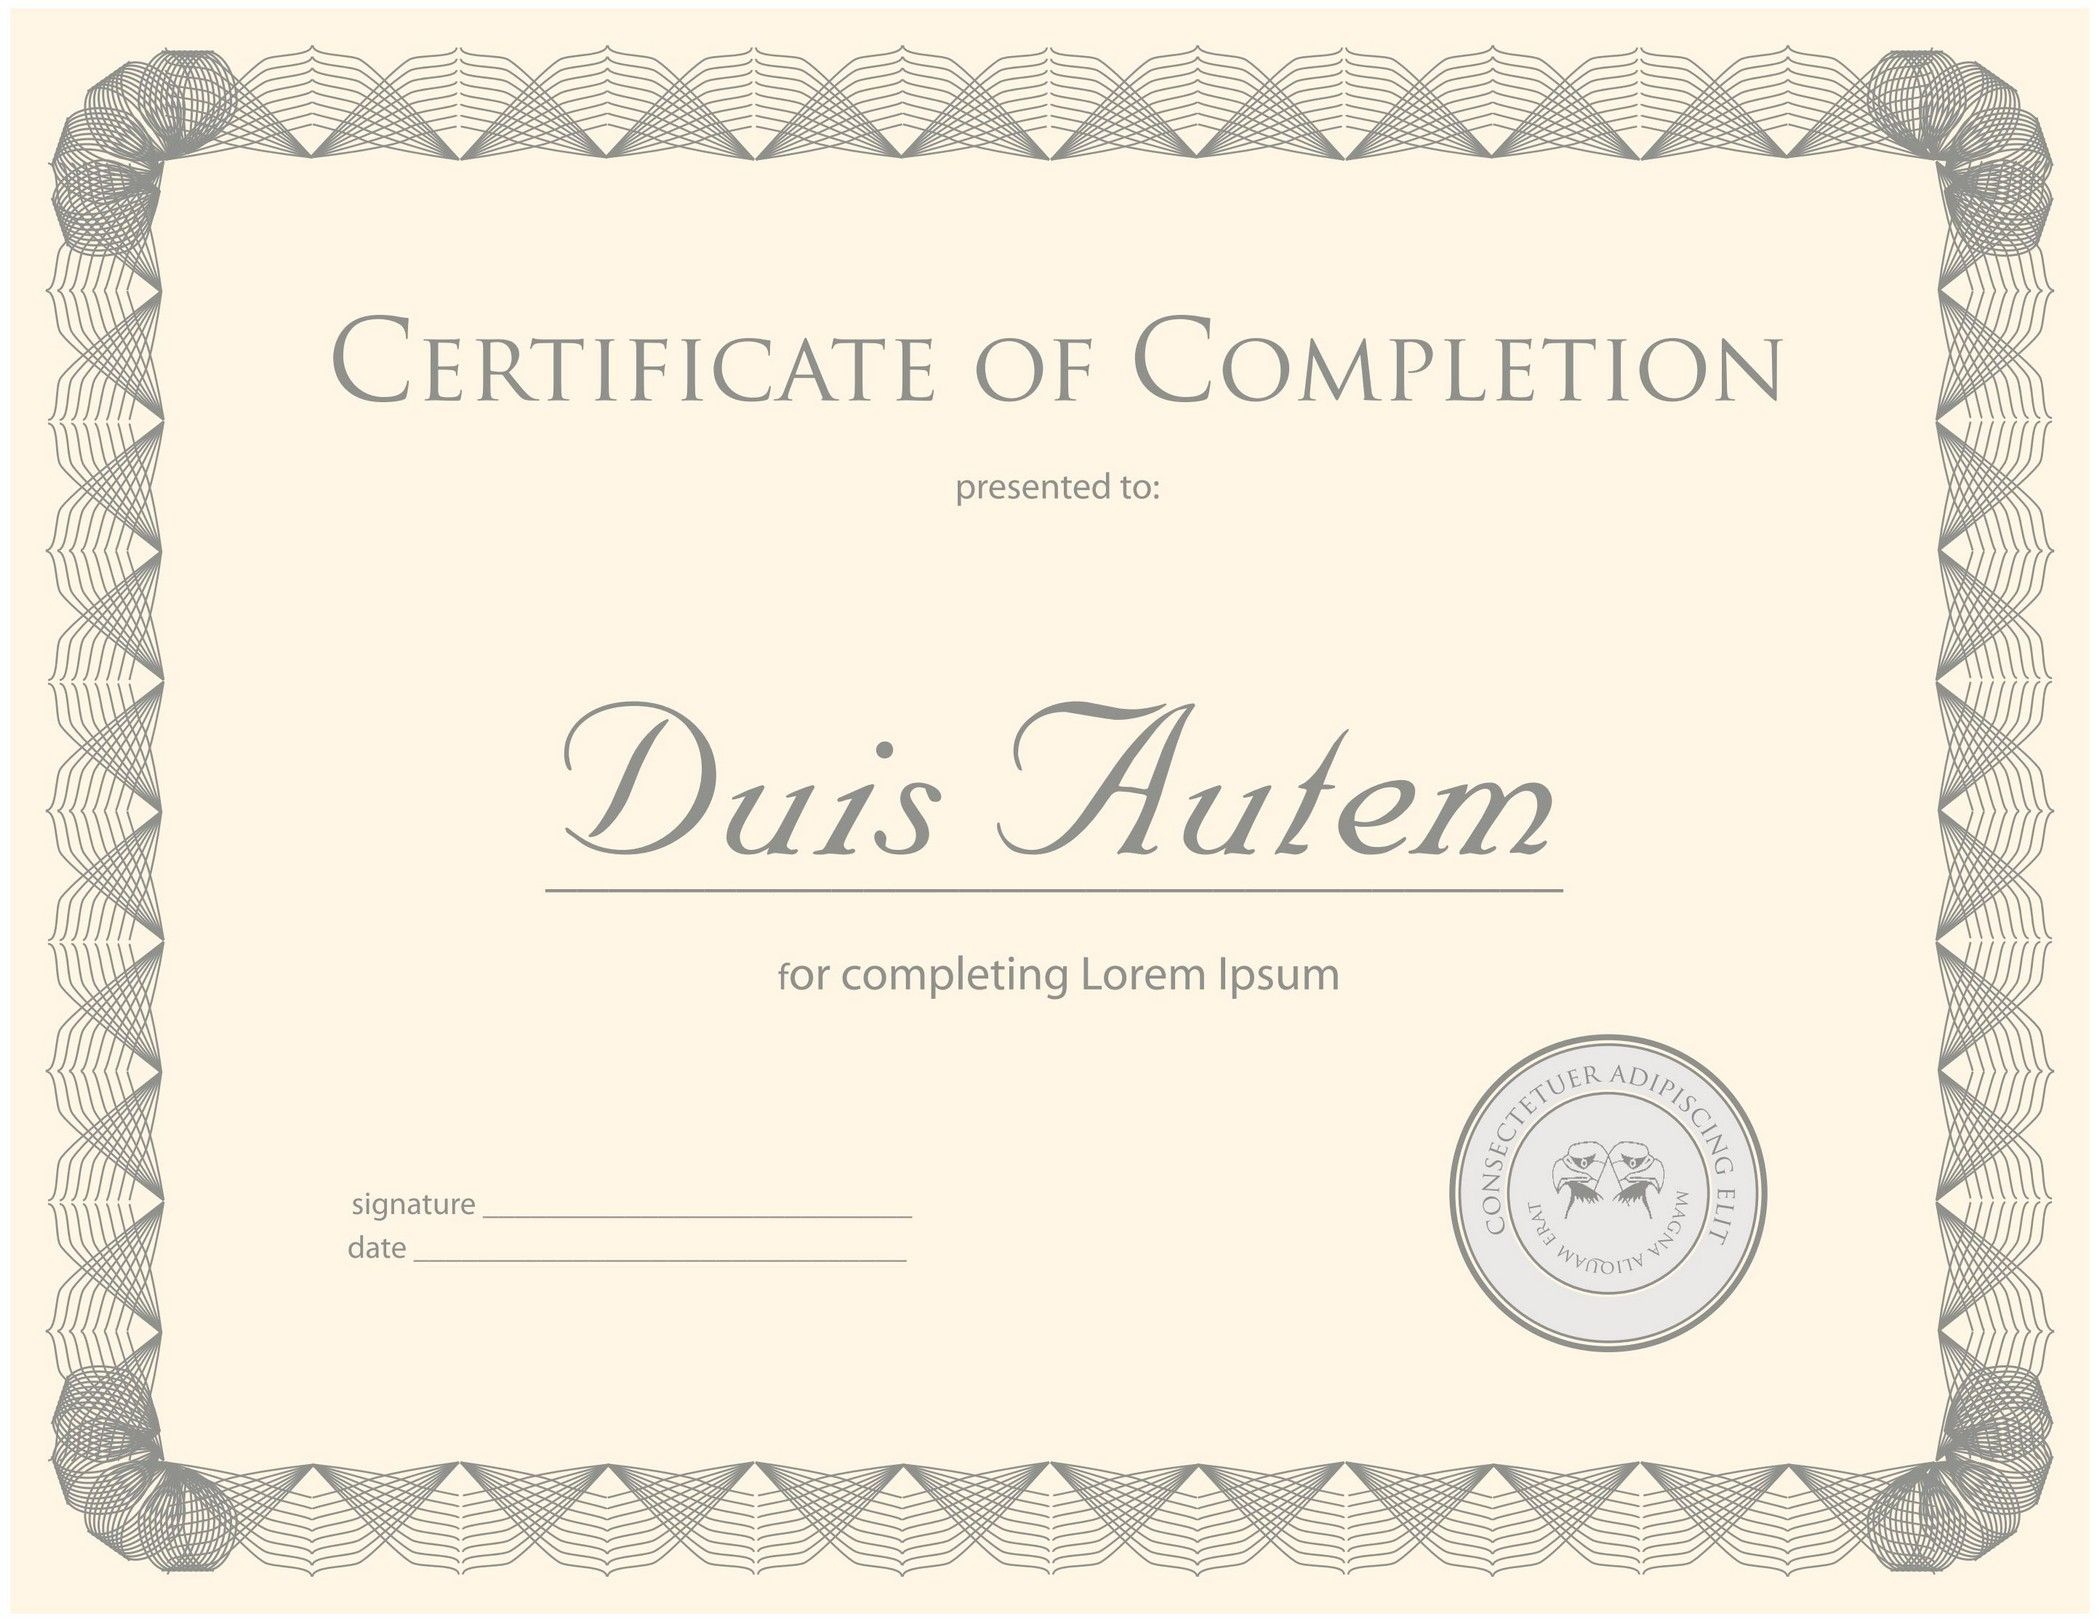 Certificate Templates03 | Norway | Certificate Templates With This Certificate Entitles The Bearer To Template